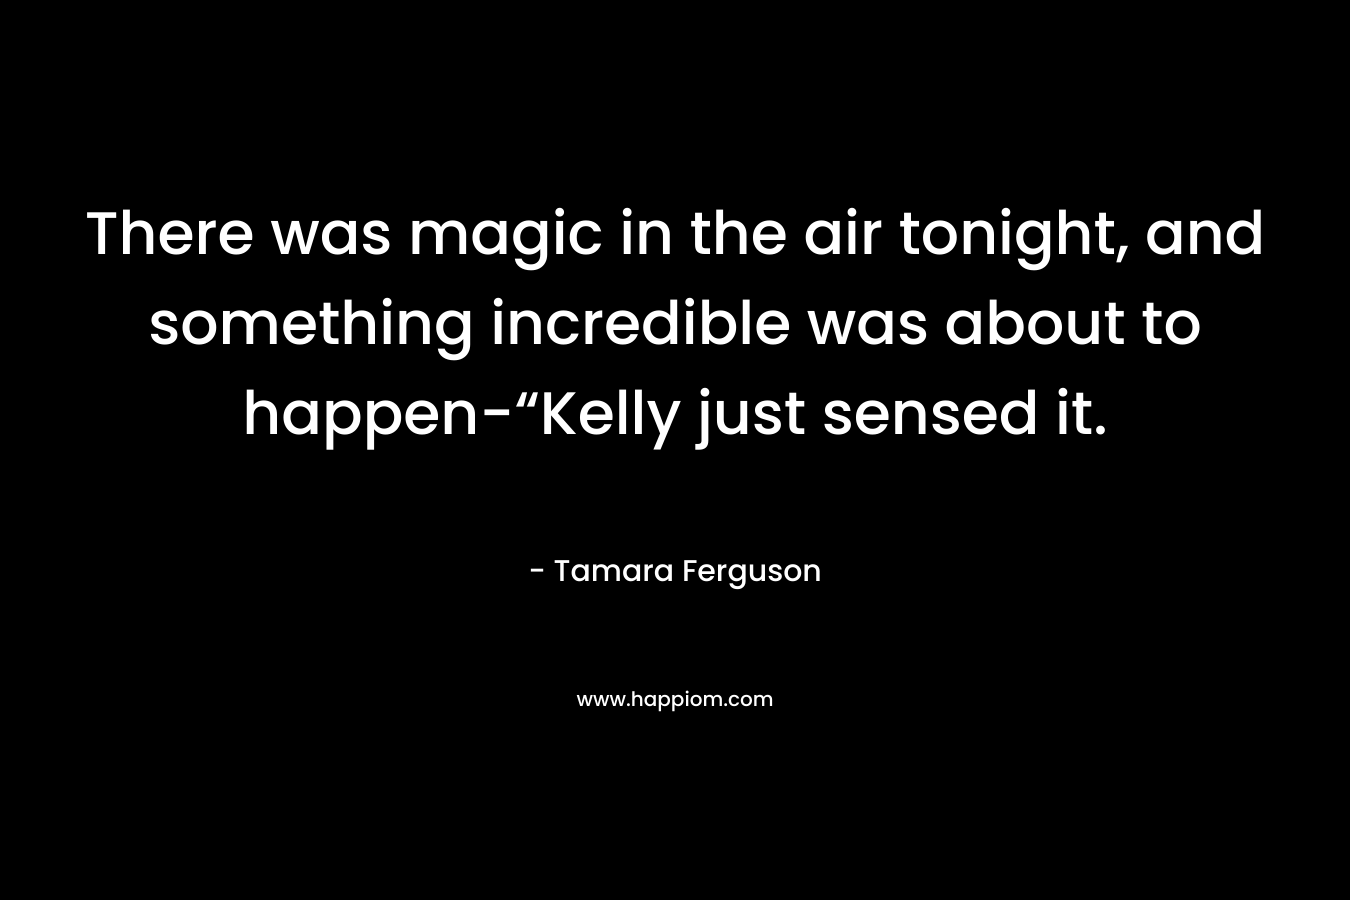 There was magic in the air tonight, and something incredible was about to happen-“Kelly just sensed it. – Tamara Ferguson